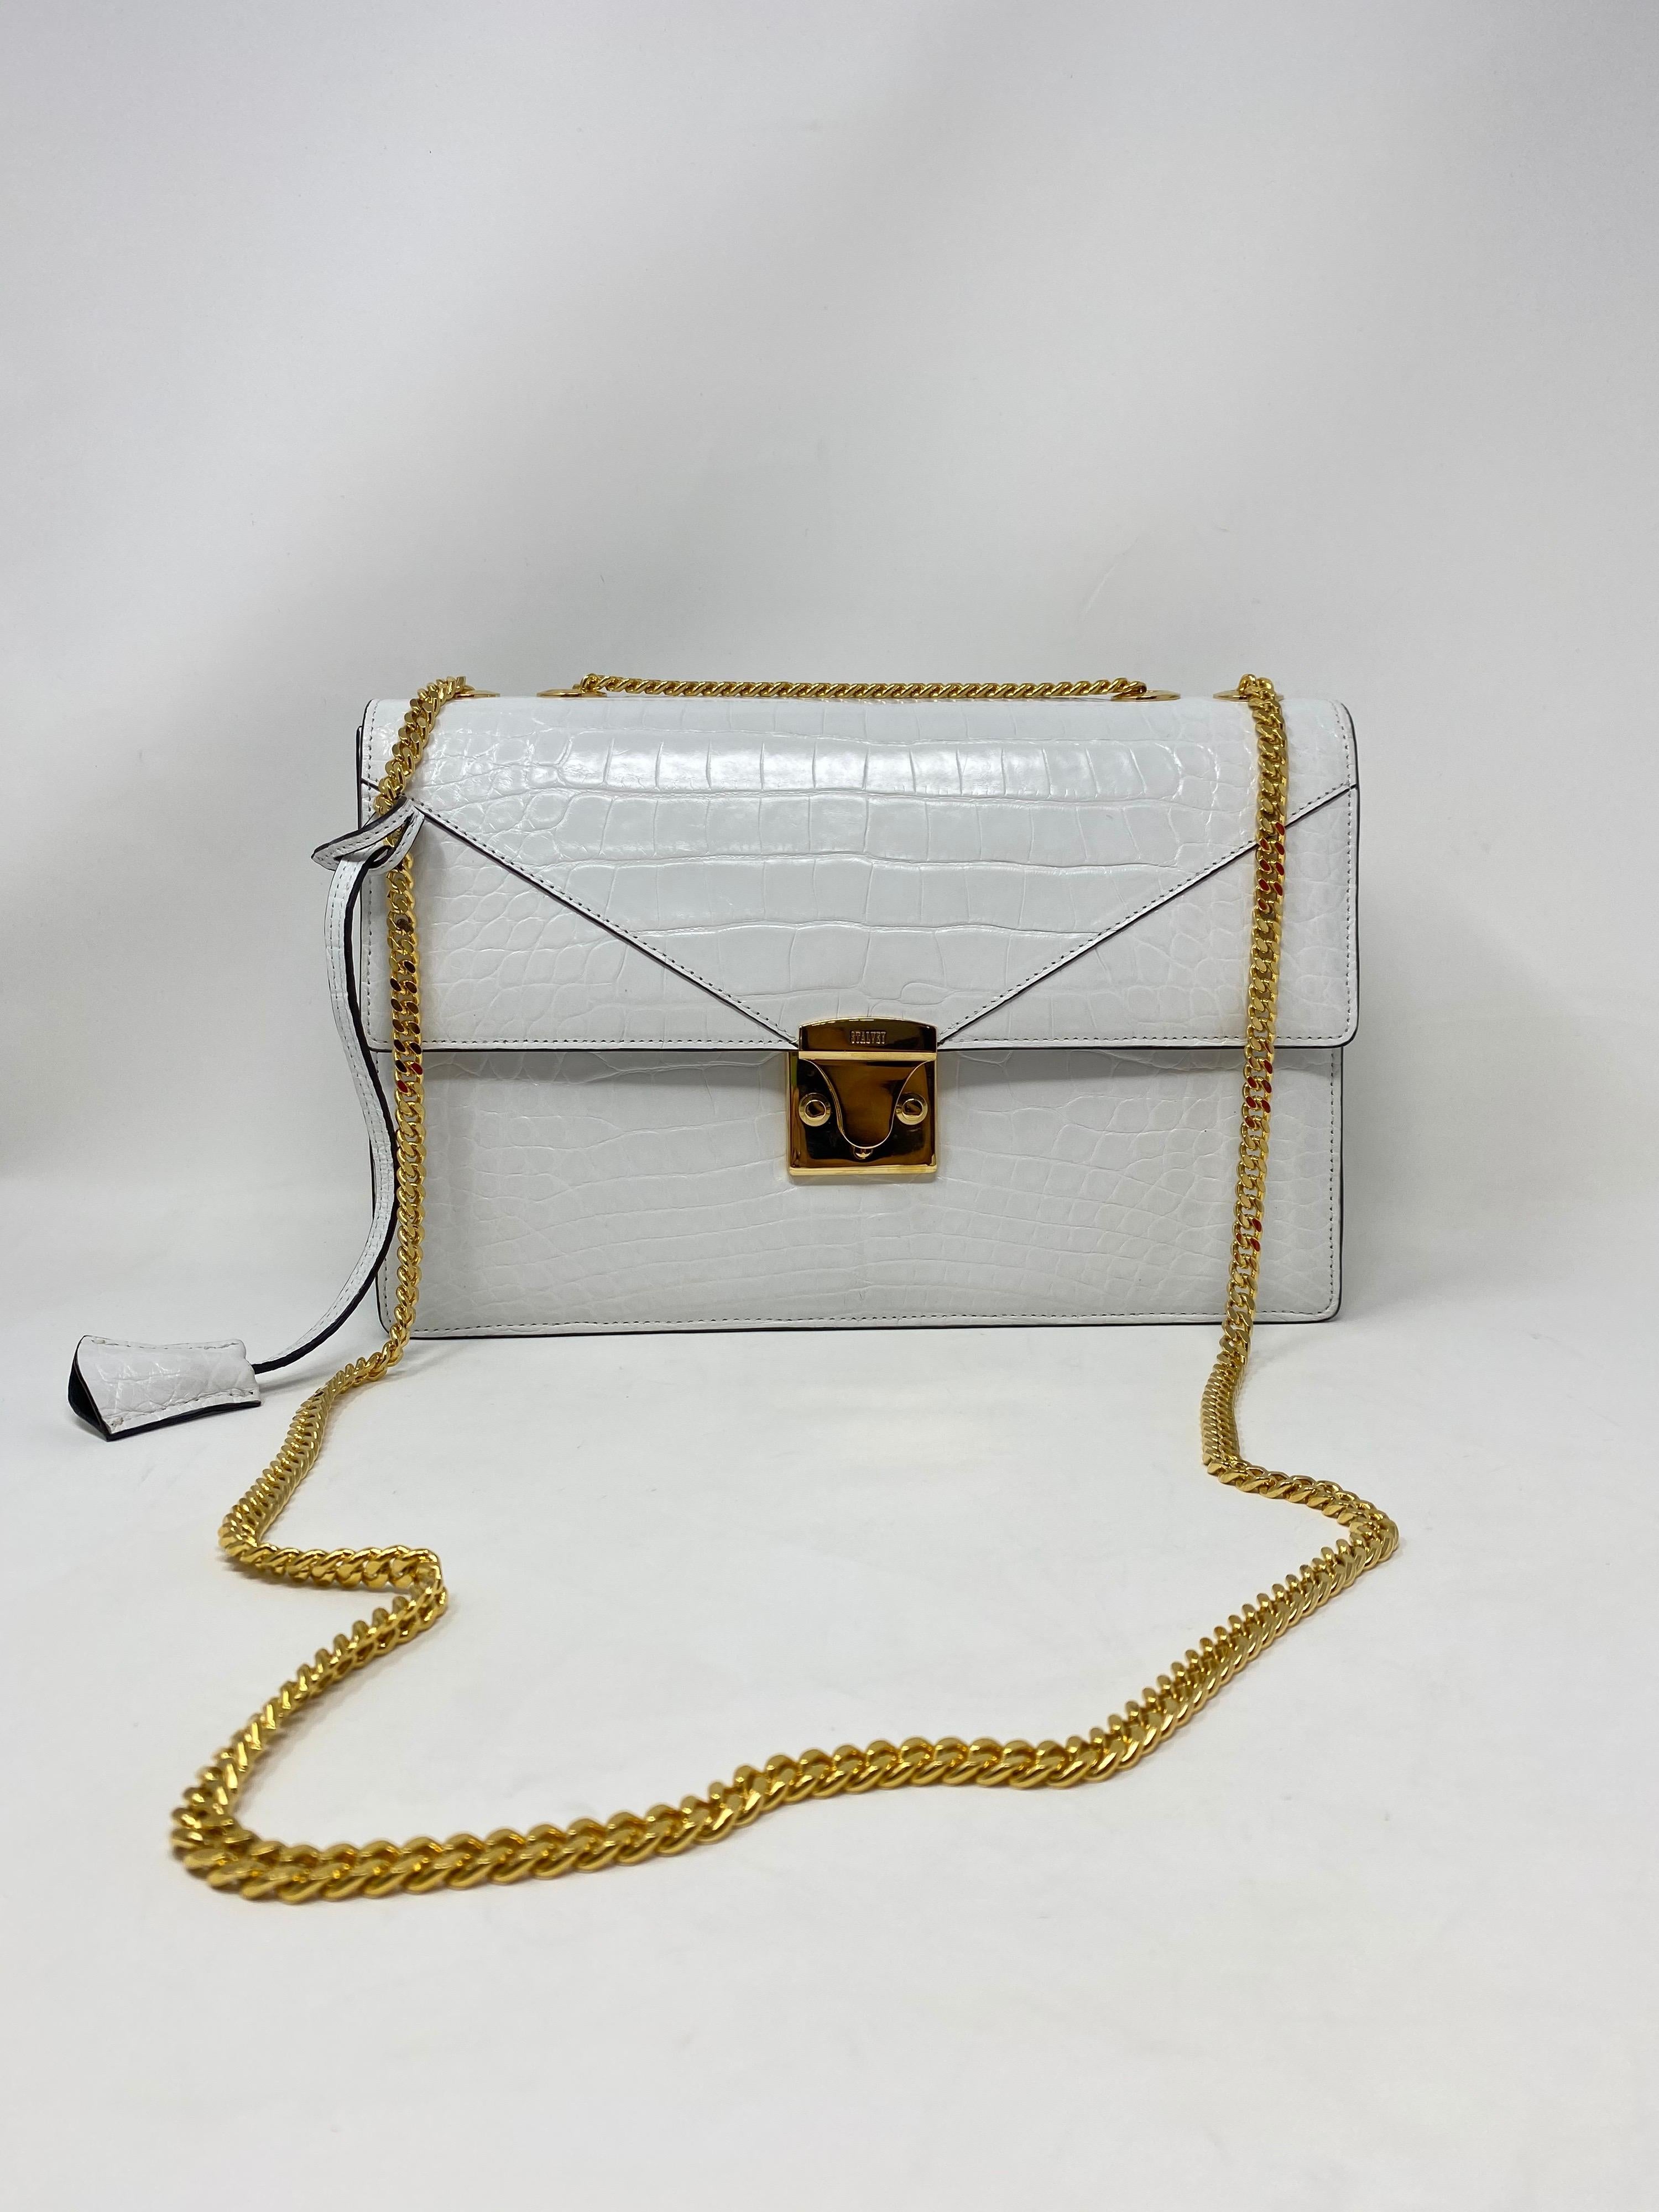 Jason Stalvey White Lizard Handbag. Brand new. Purchased from an exclusive trunk show at Nieman Marcus. Stalvey rare white lizard handbag with gold hardware. The bag measures 12x8x 3. The strap has 12-22” drop. Don't miss out on this one of a kind